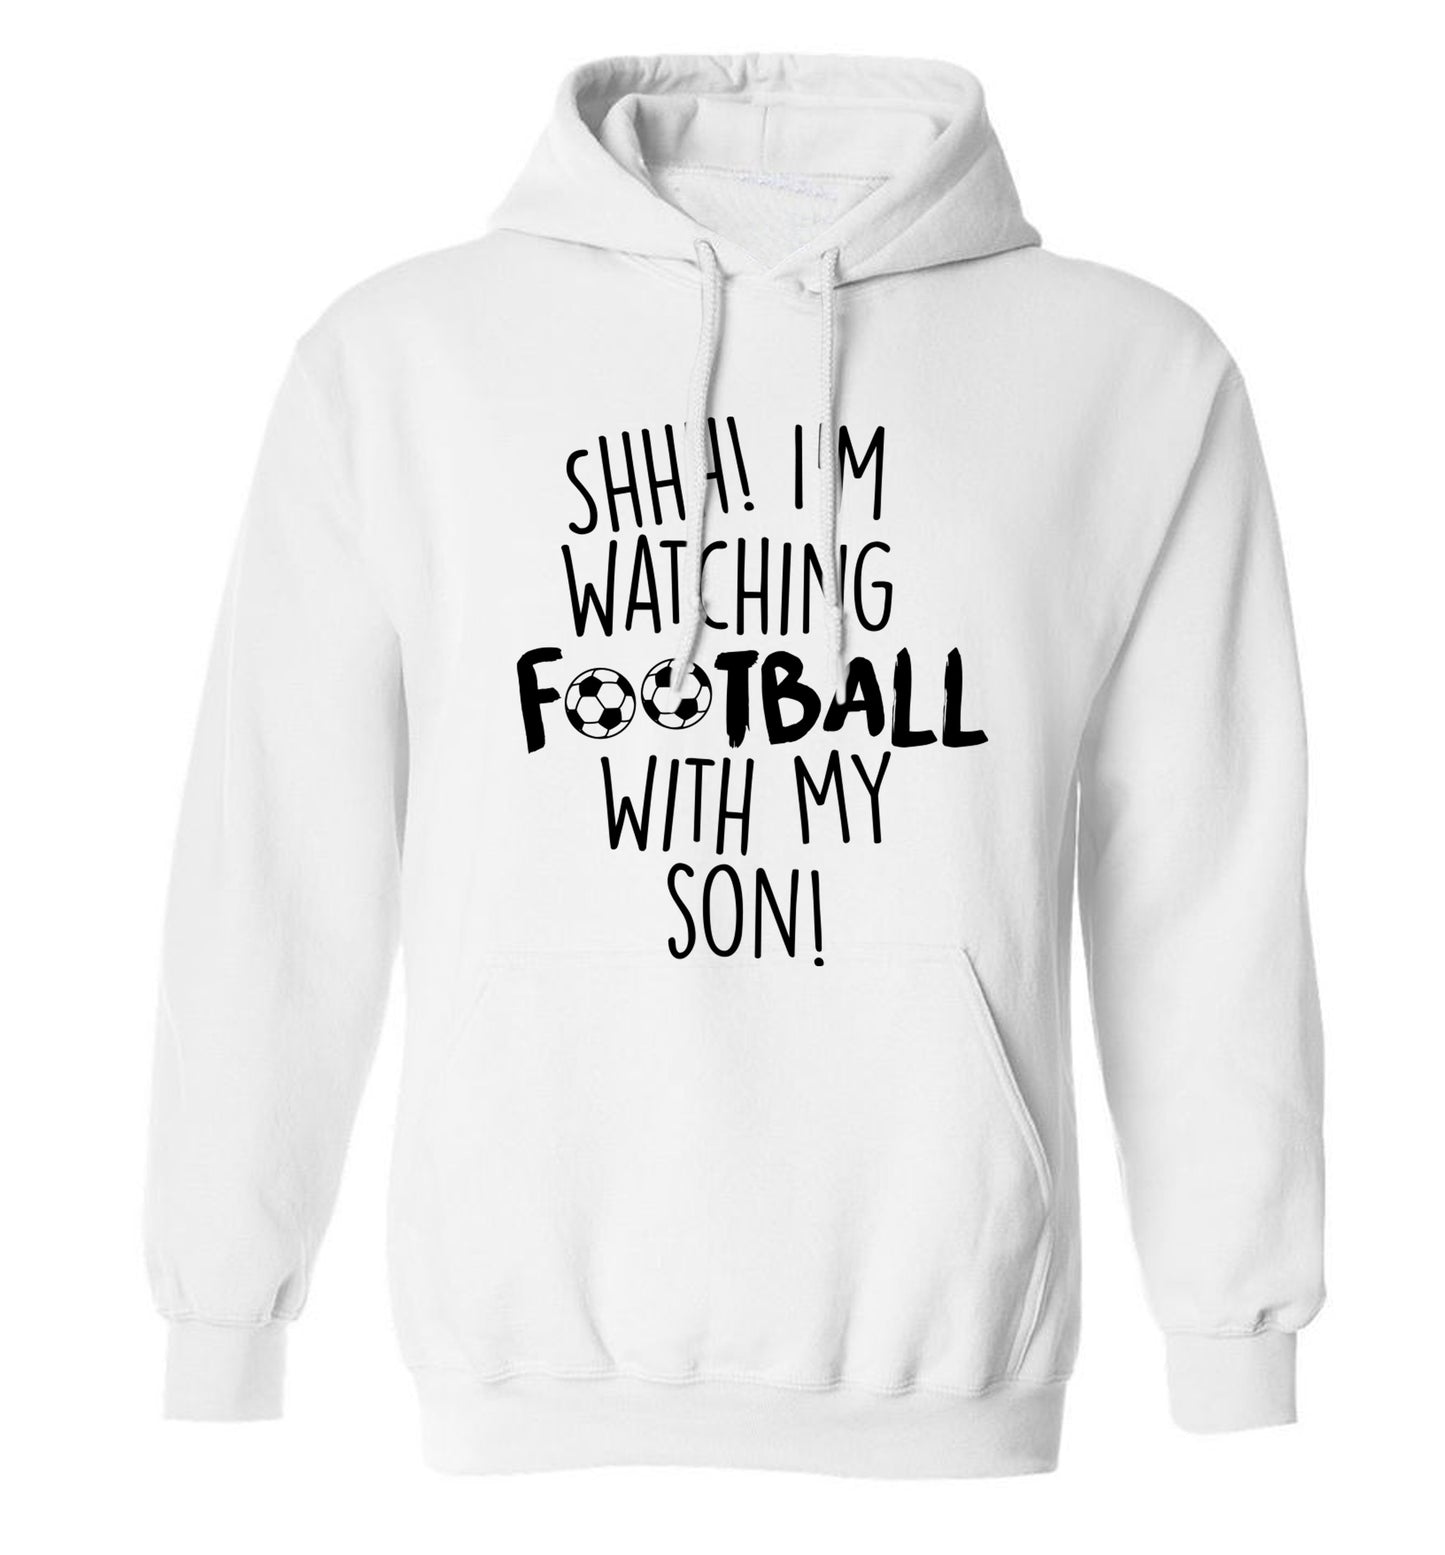 Shhh I'm watching football with my son adults unisexwhite hoodie 2XL